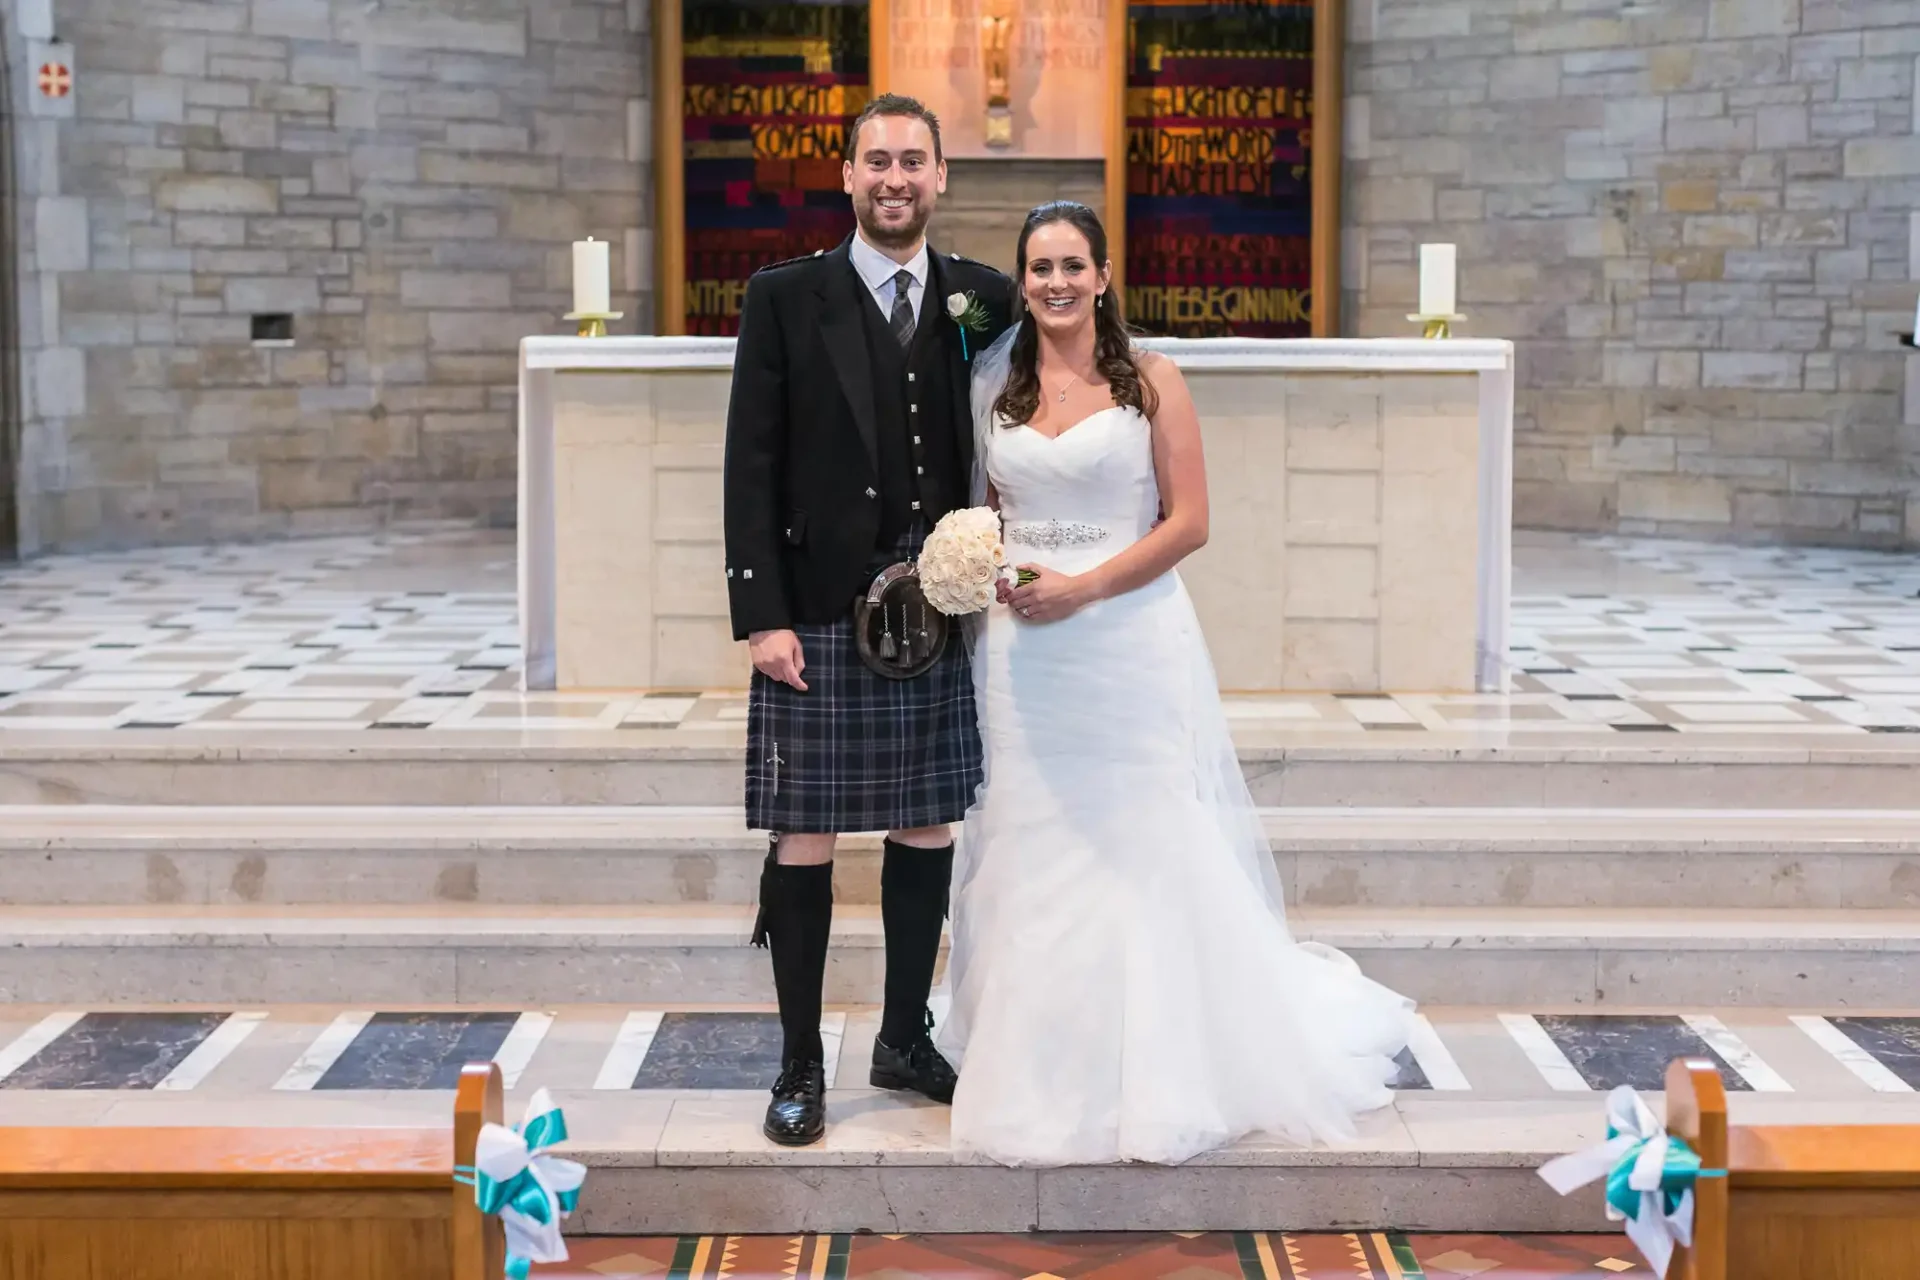 A bride and groom smiling, standing in a church; the groom wears a kilt and the bride is in a white gown, holding a bouquet.